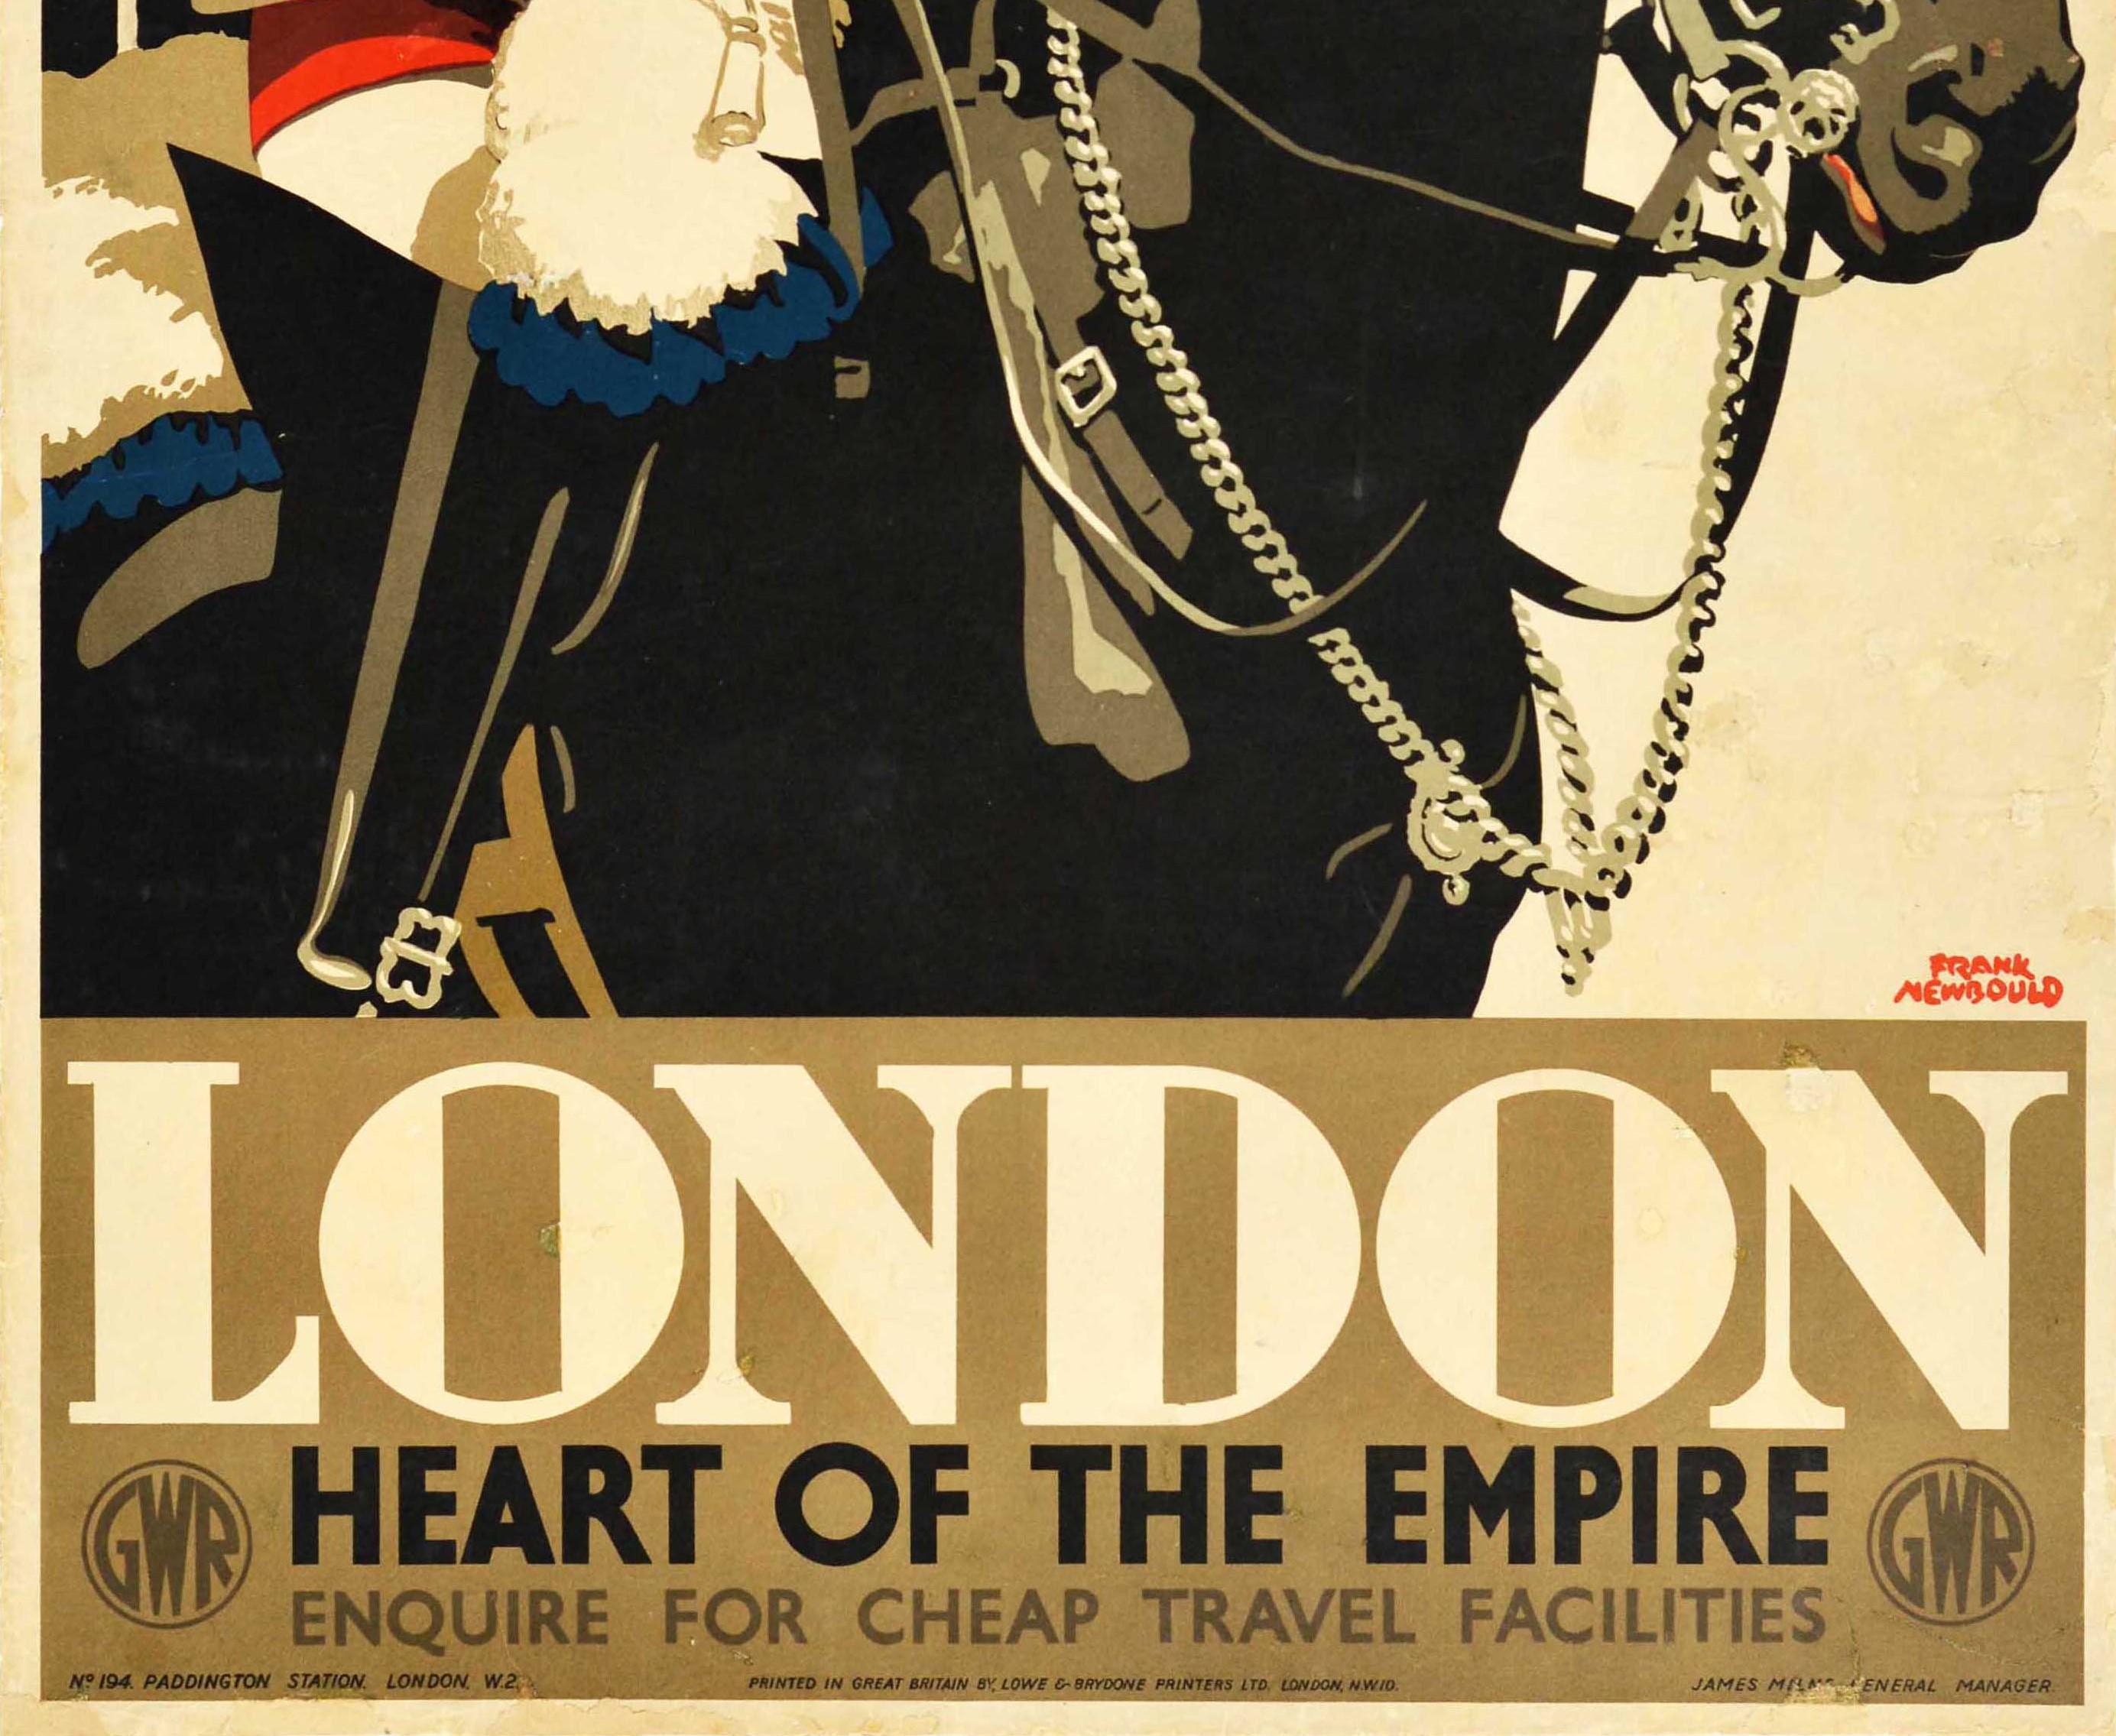 British Original Vintage Rail Travel Poster London Heart Of The Empire GWR Horse Guard For Sale